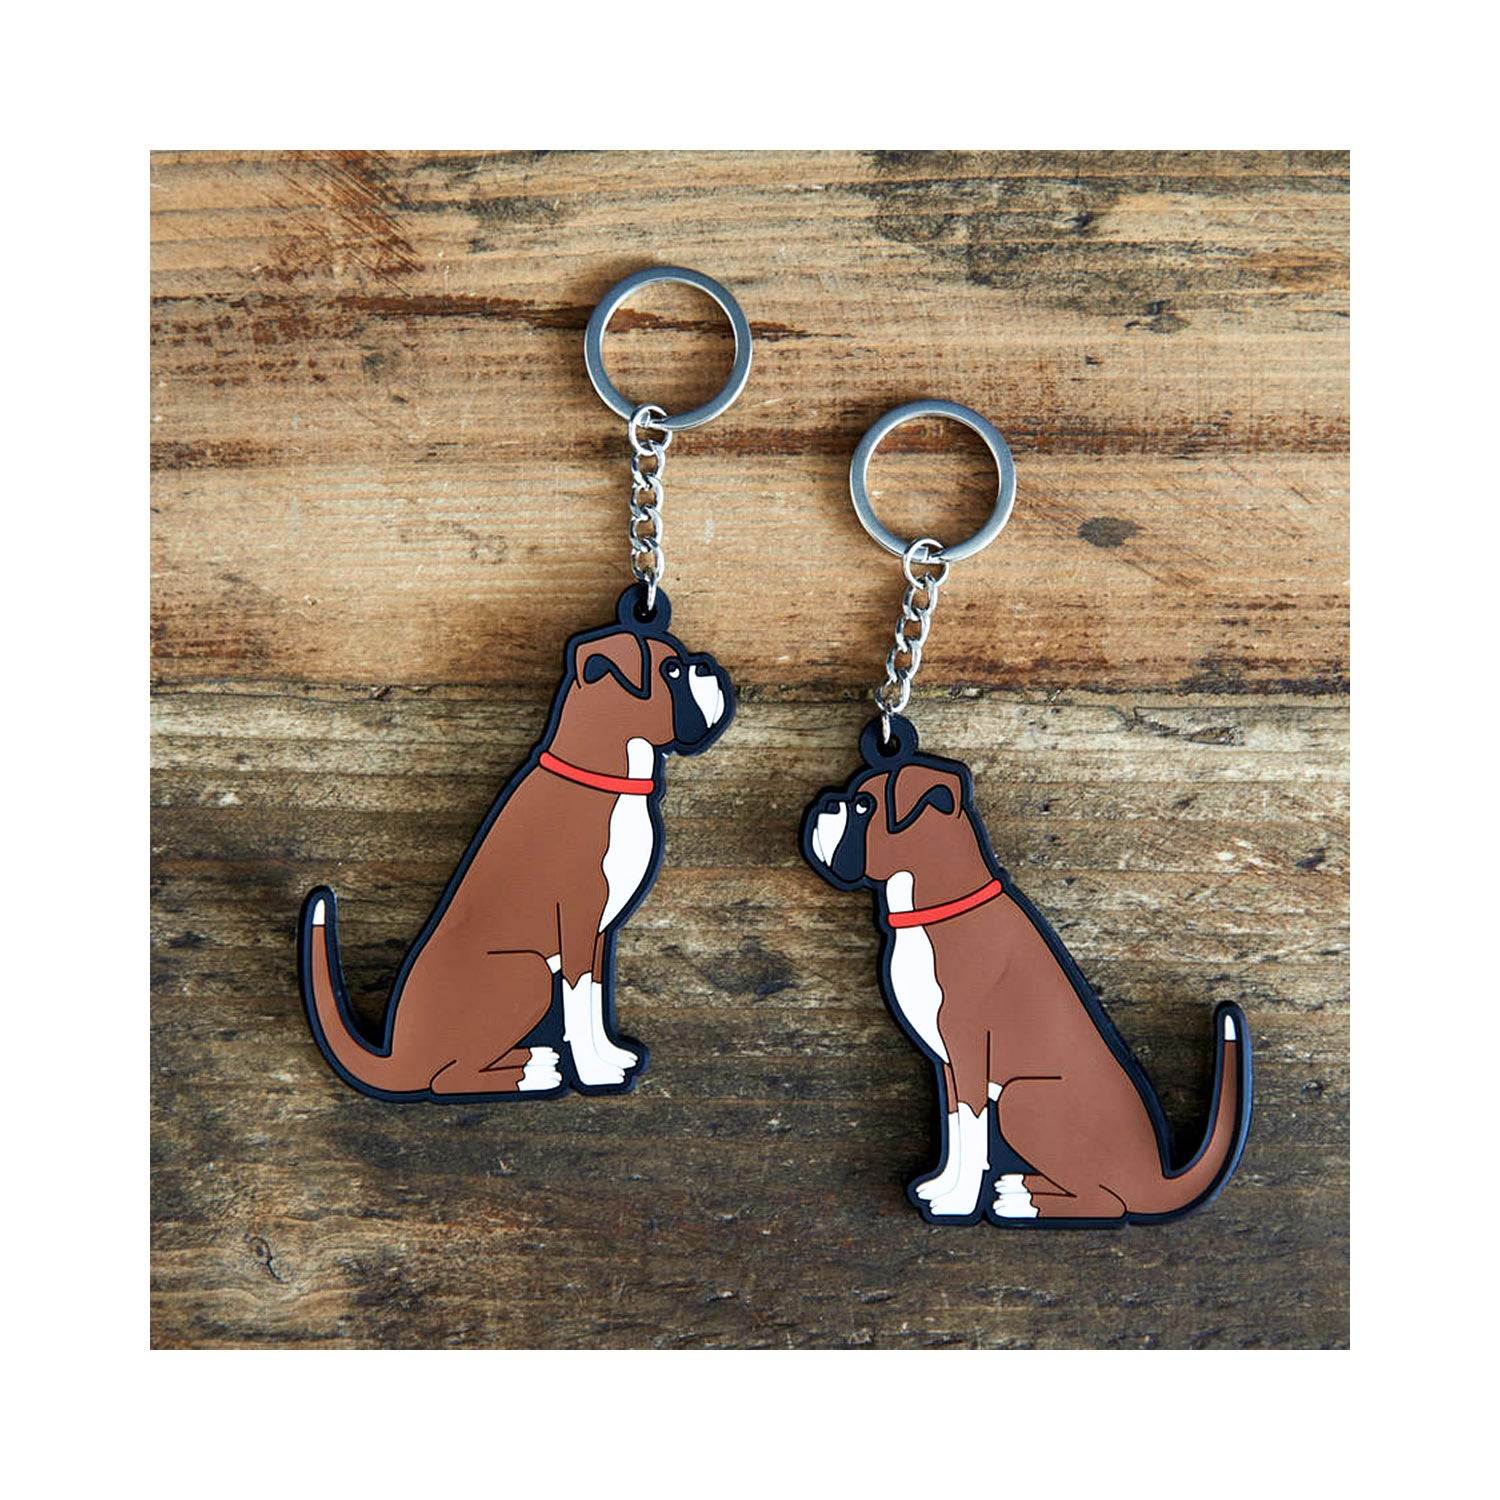 Dog Lover Gifts available at Dog Krazy Gifts - Archie The Boxer Dog Keyring - part of the Sweet William range available from Dog Krazy Gifts